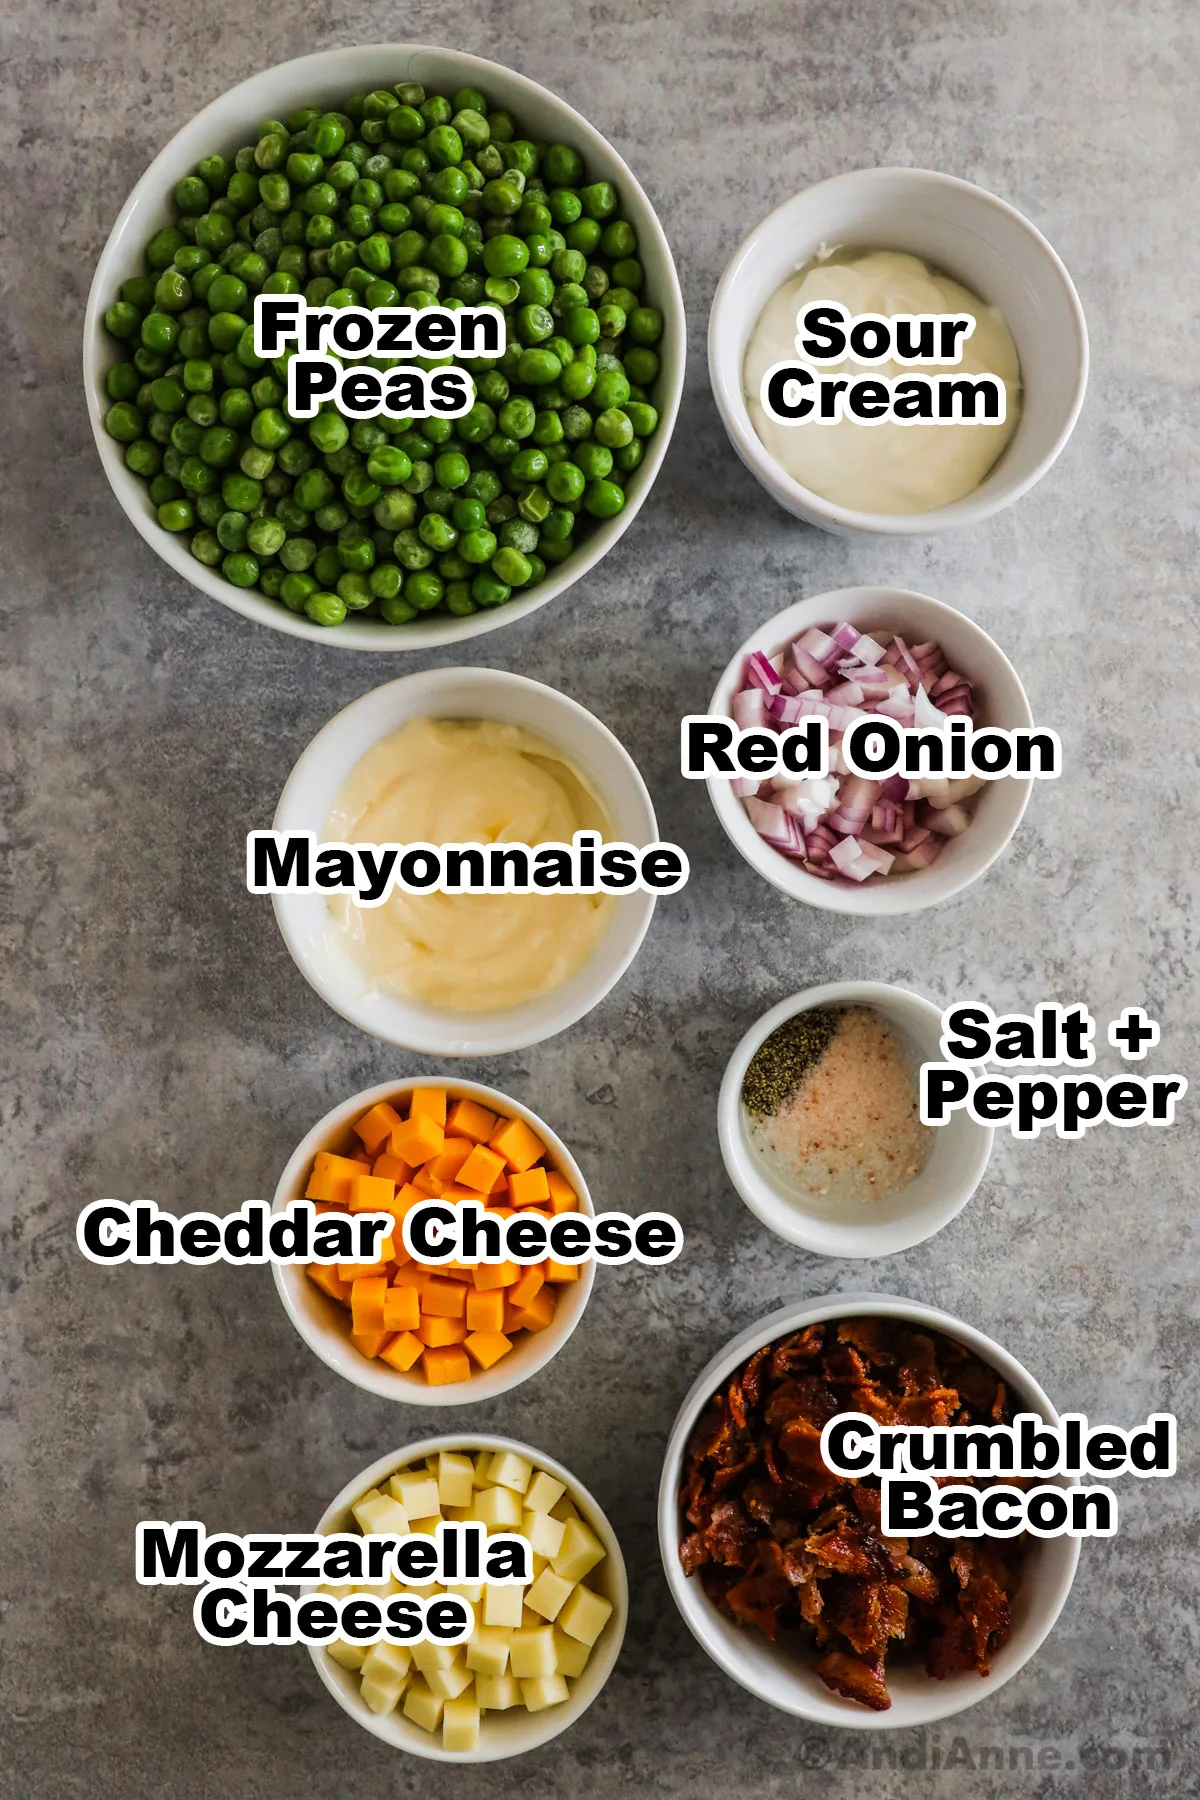 Recipe ingredients in bowls including frozen peas, sour cream, mayonnaise, red onion, cheese, crumbled bacon, salt and pepper.